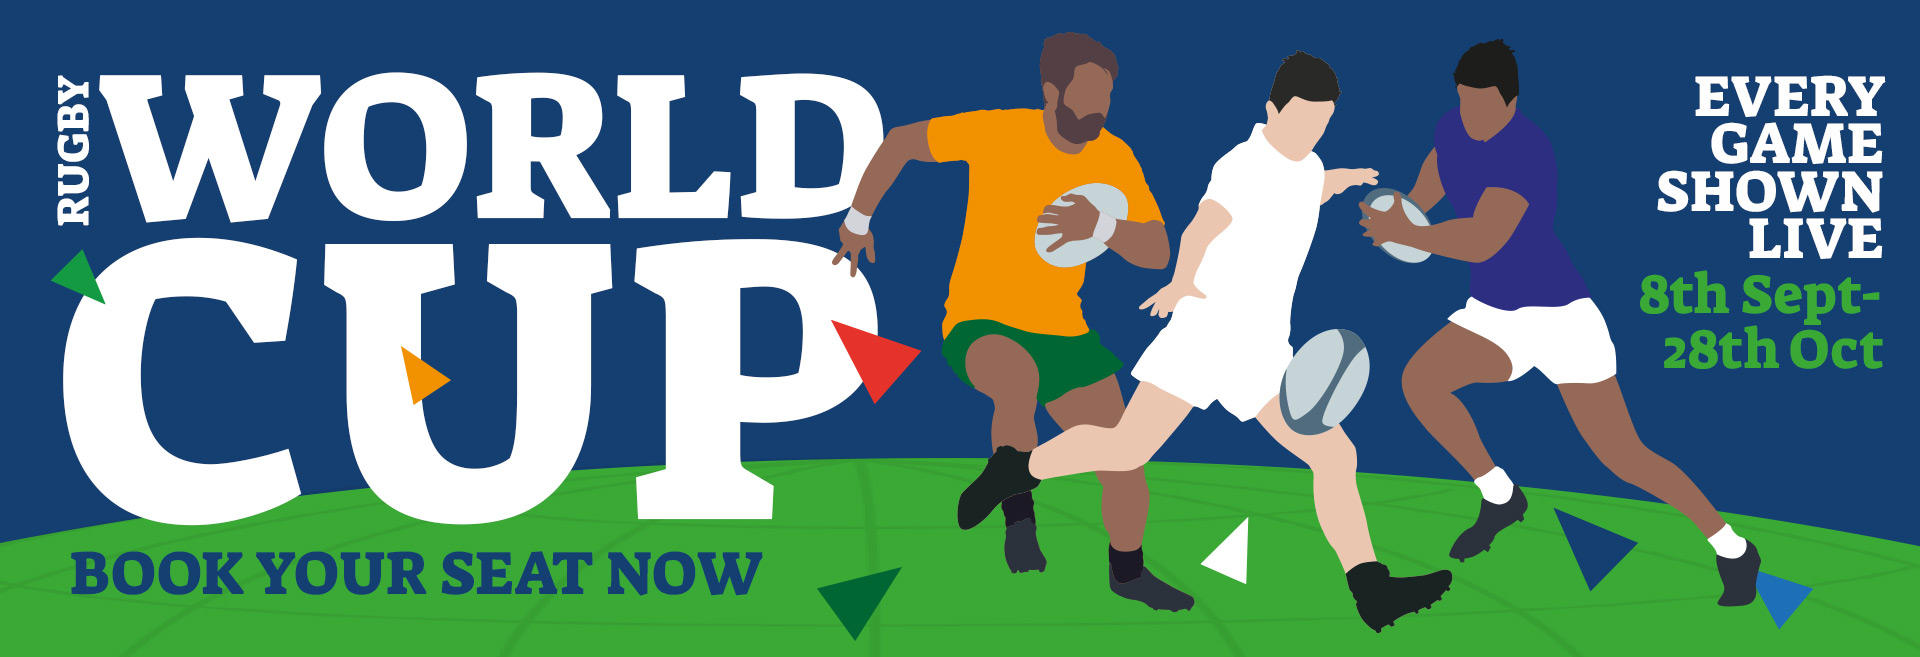 Watch the Rugby World Cup at The Crown & Sceptre